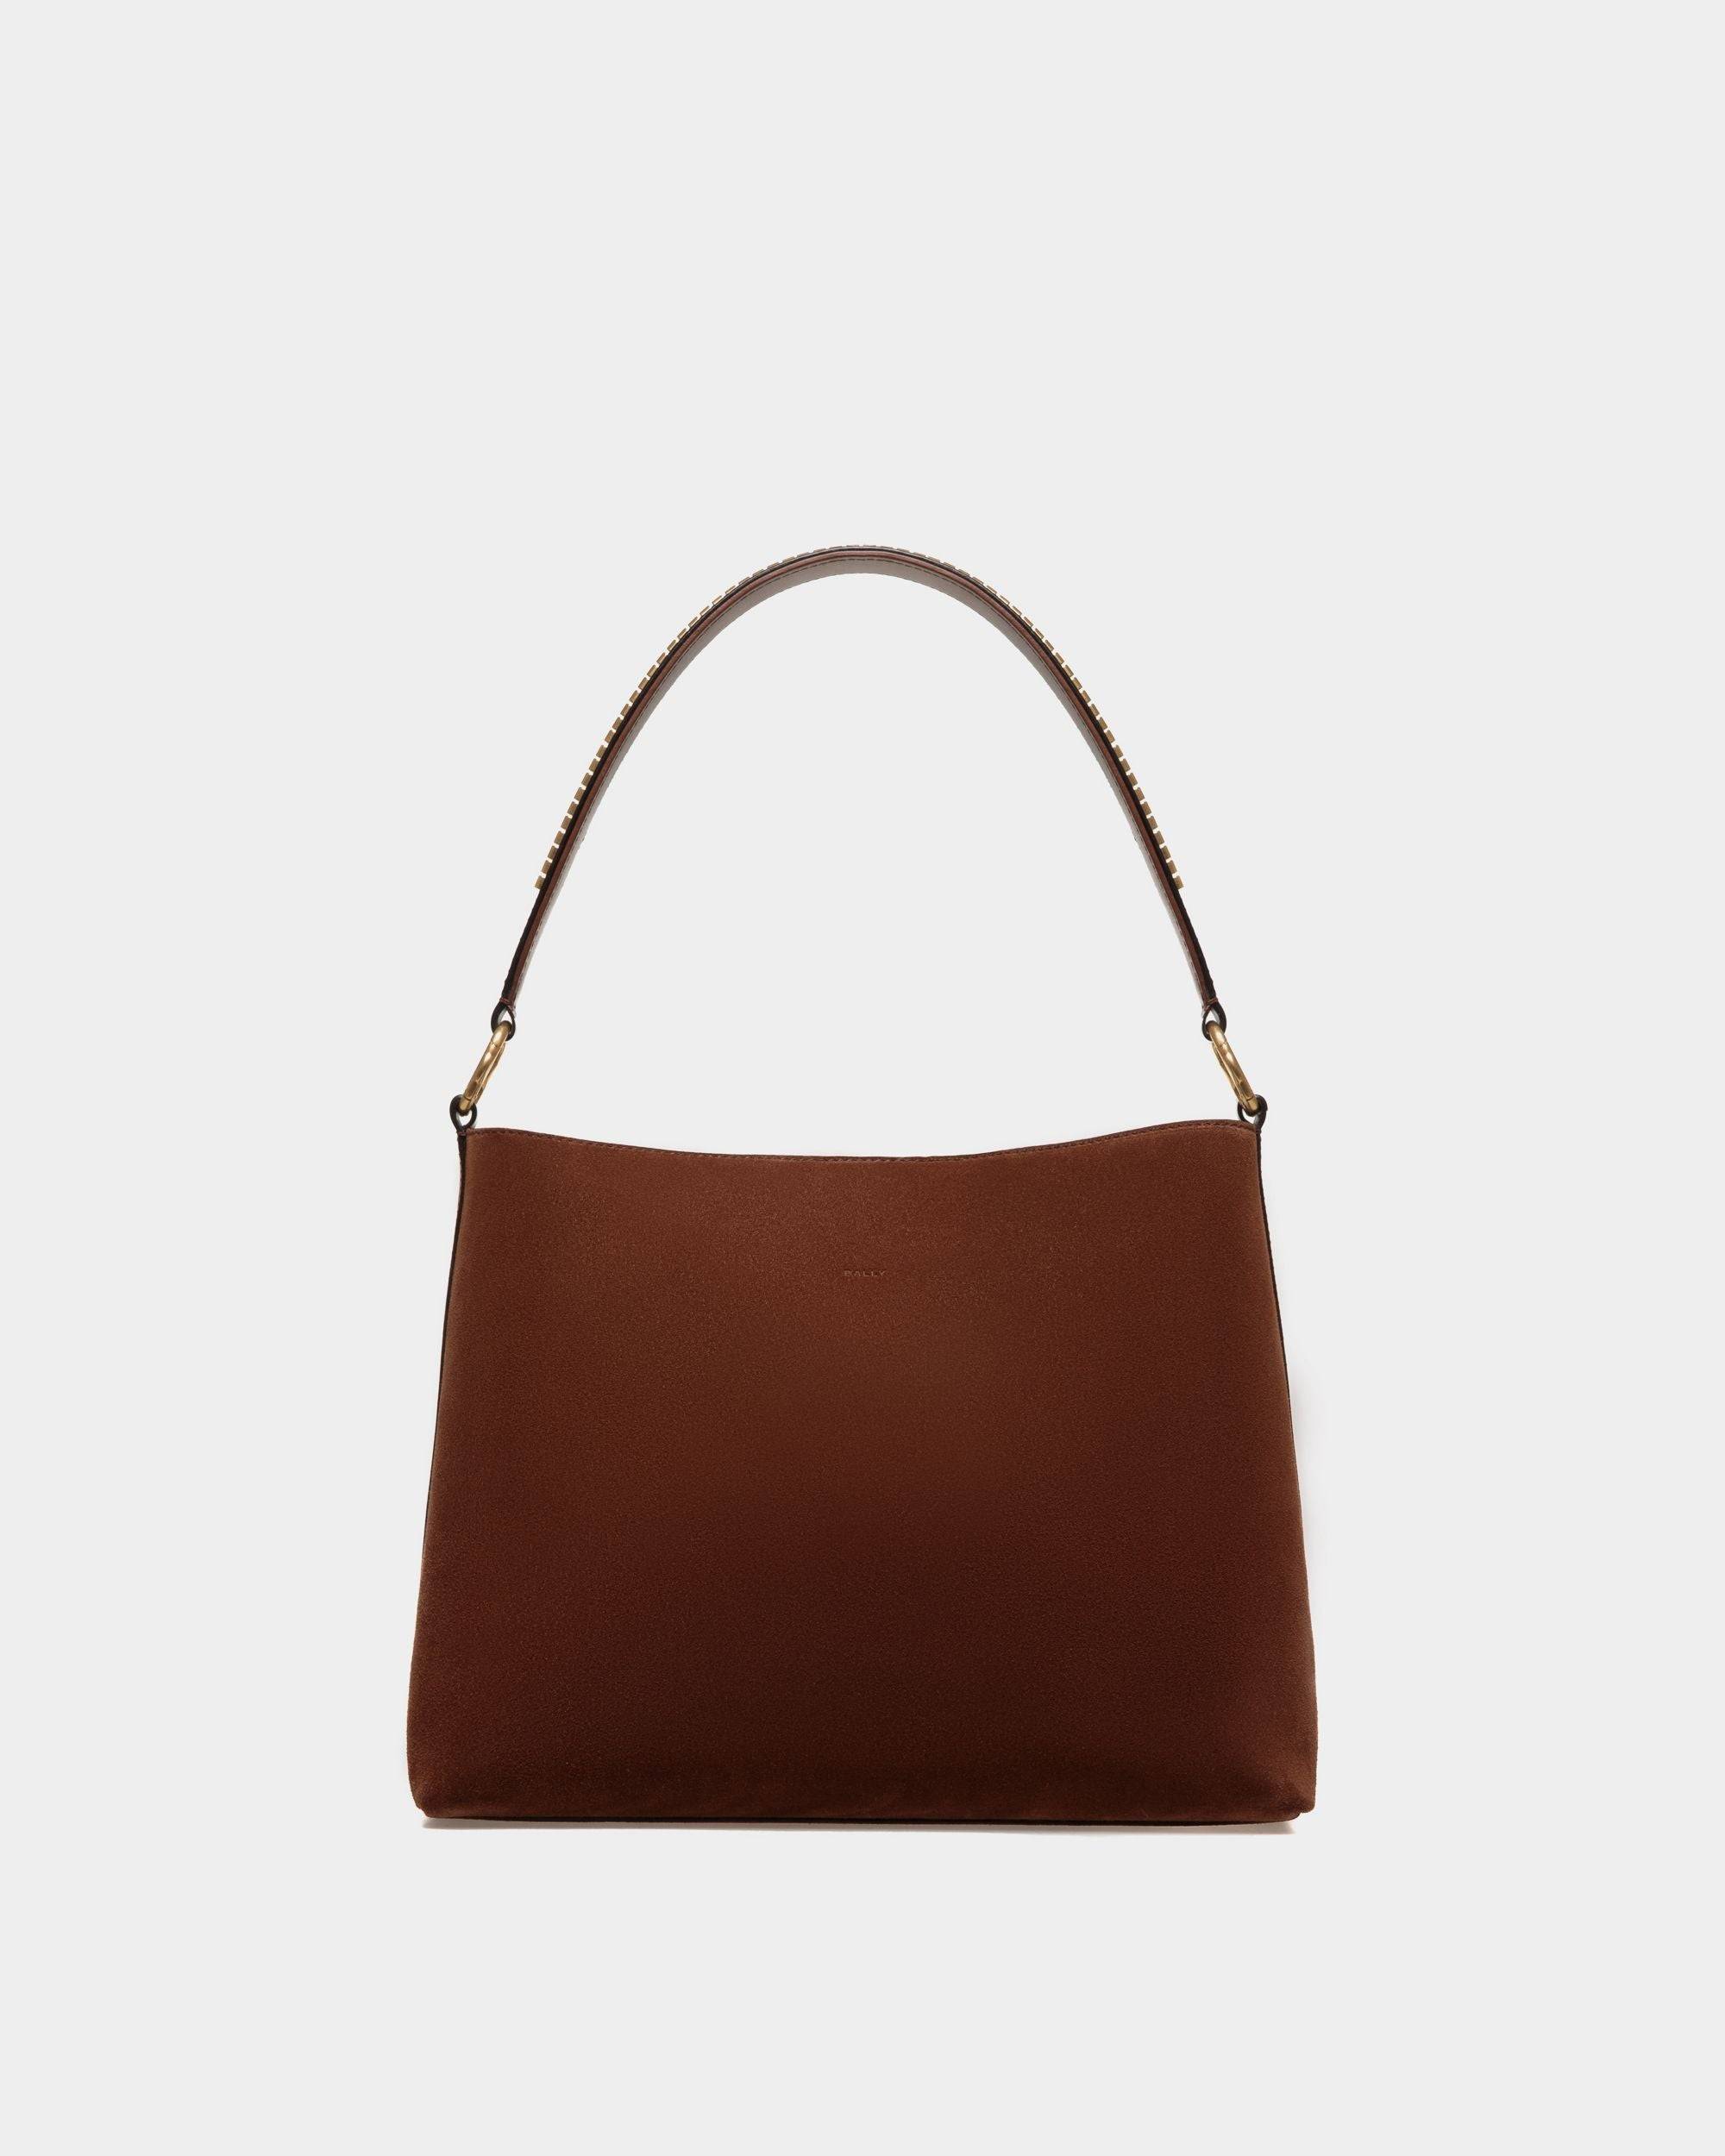 Arkle | Women's Hobo Bag in Brown Suede | Bally | Still Life Front